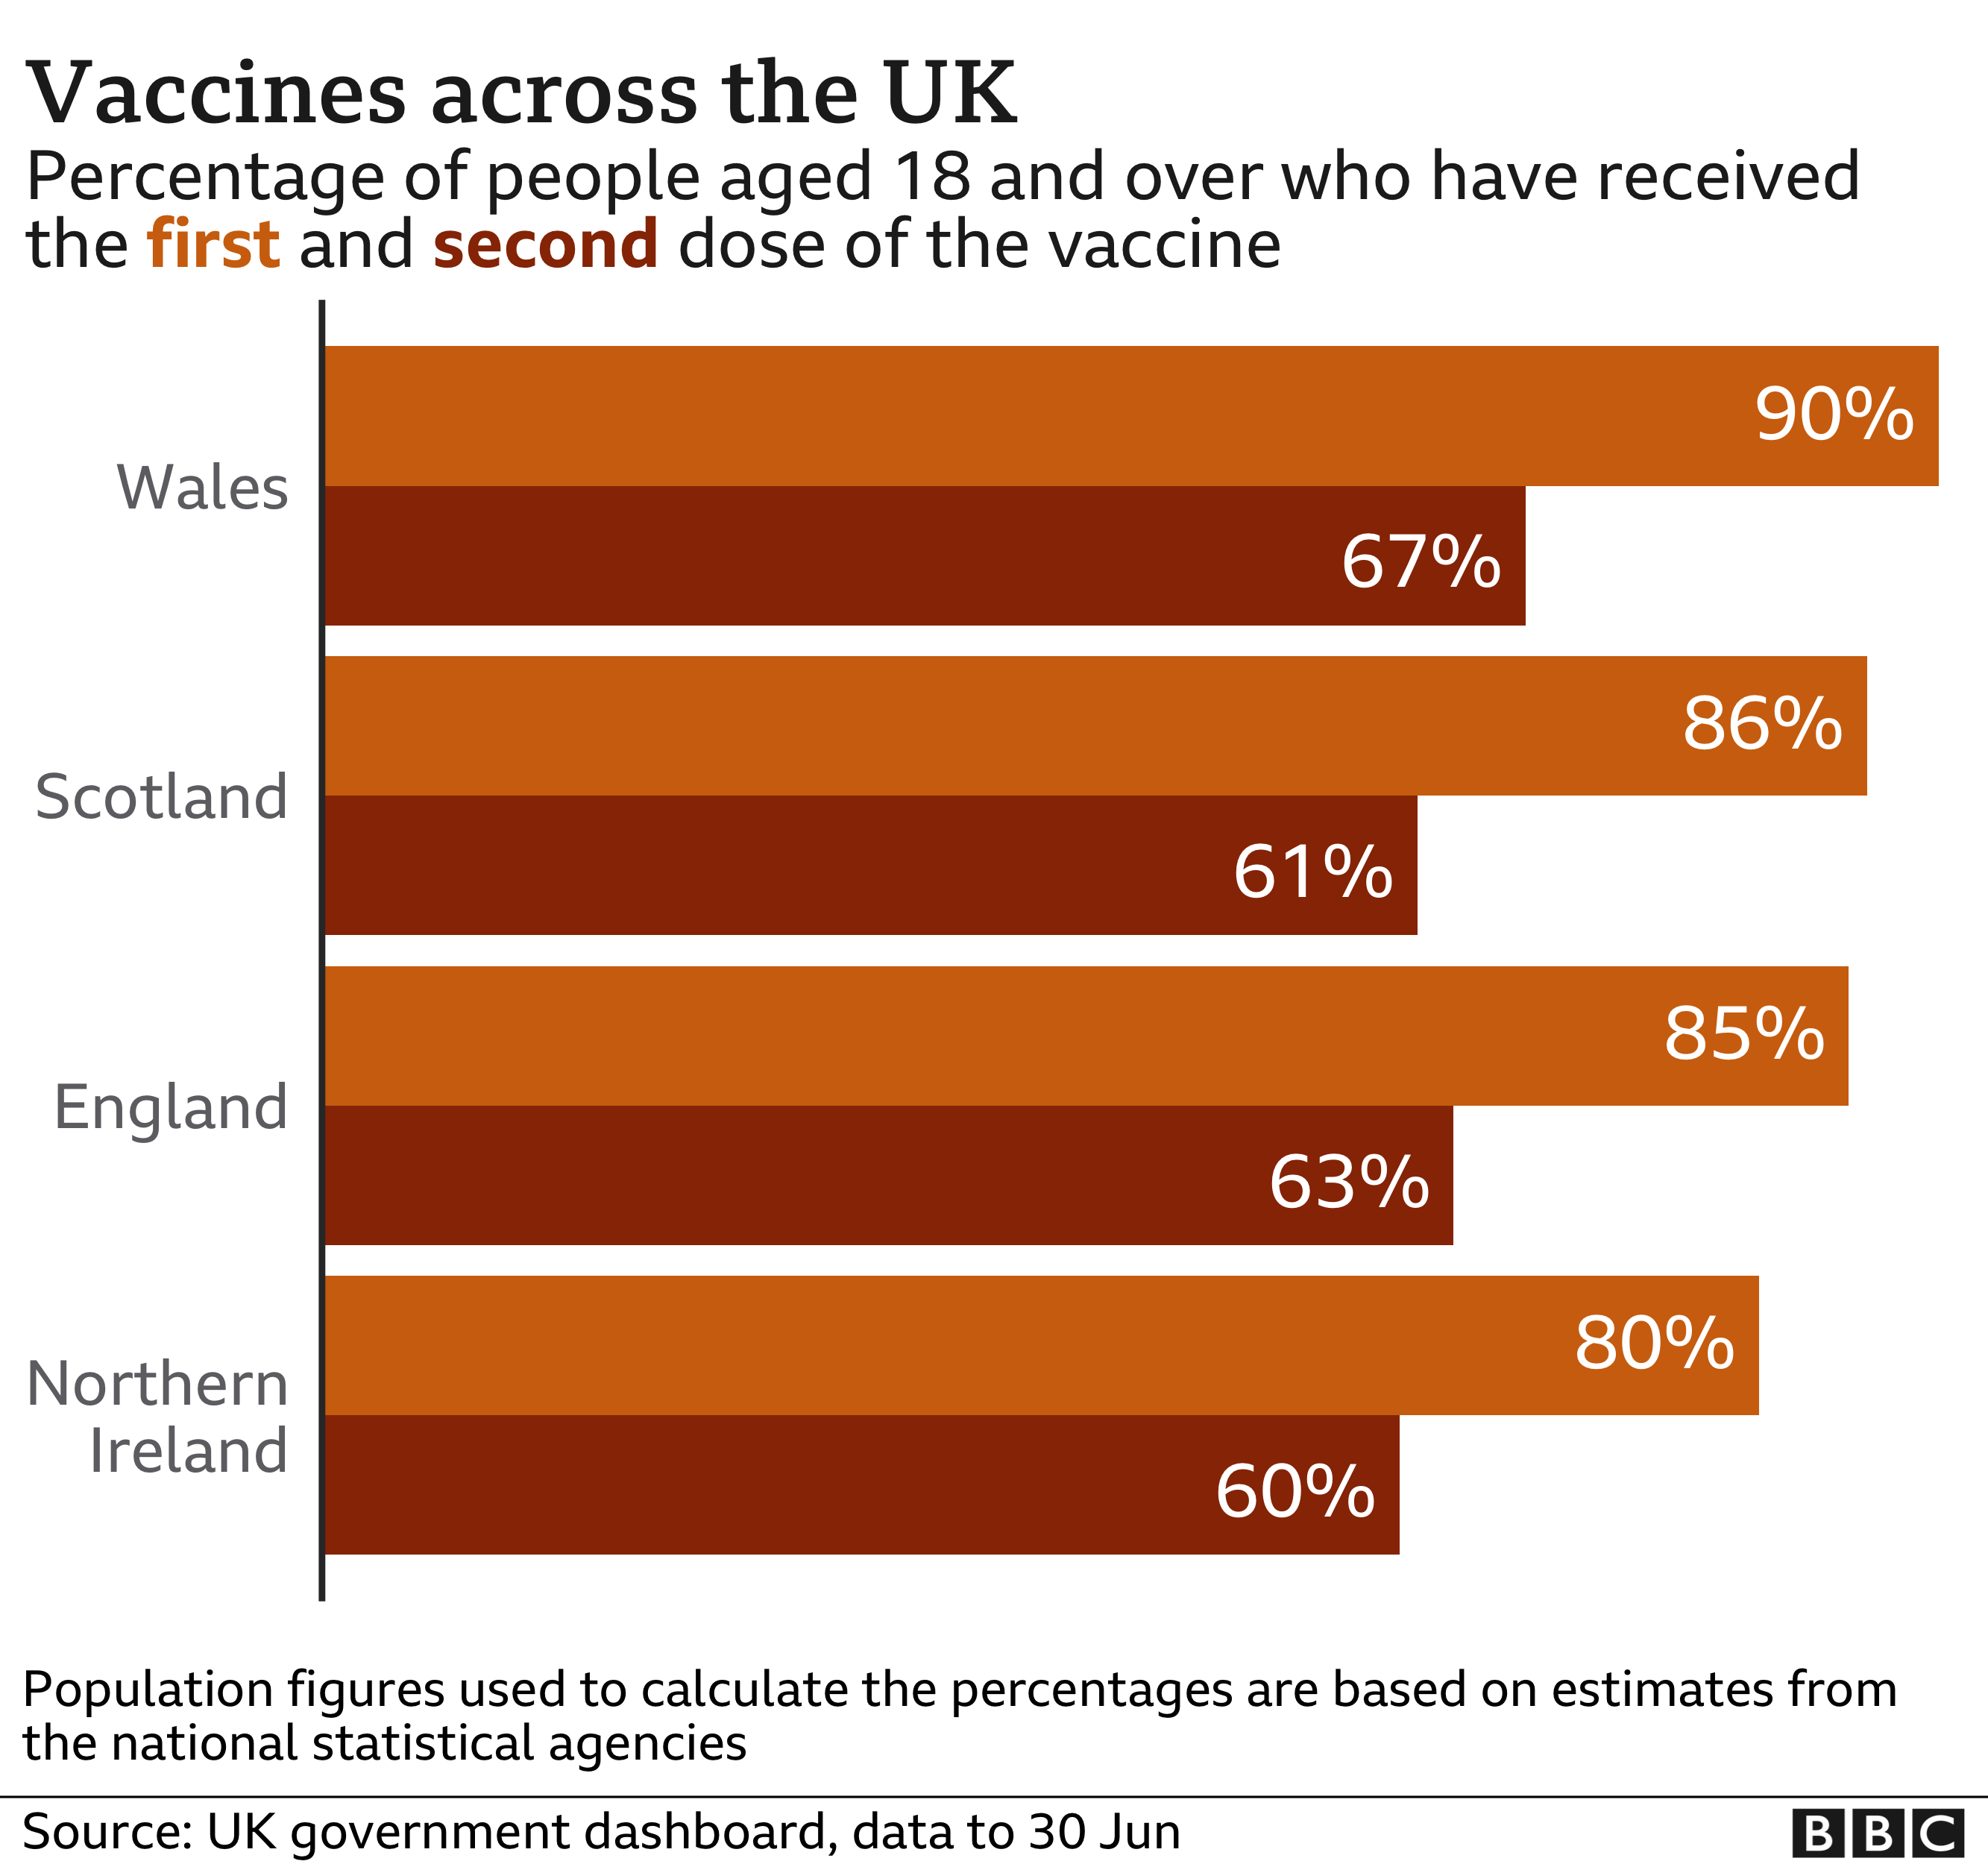 Chart of vaccine take up by UK nation - 90 of those aged 18 and over in Wales have had at least one dose compared with 80 in Northern Ireland